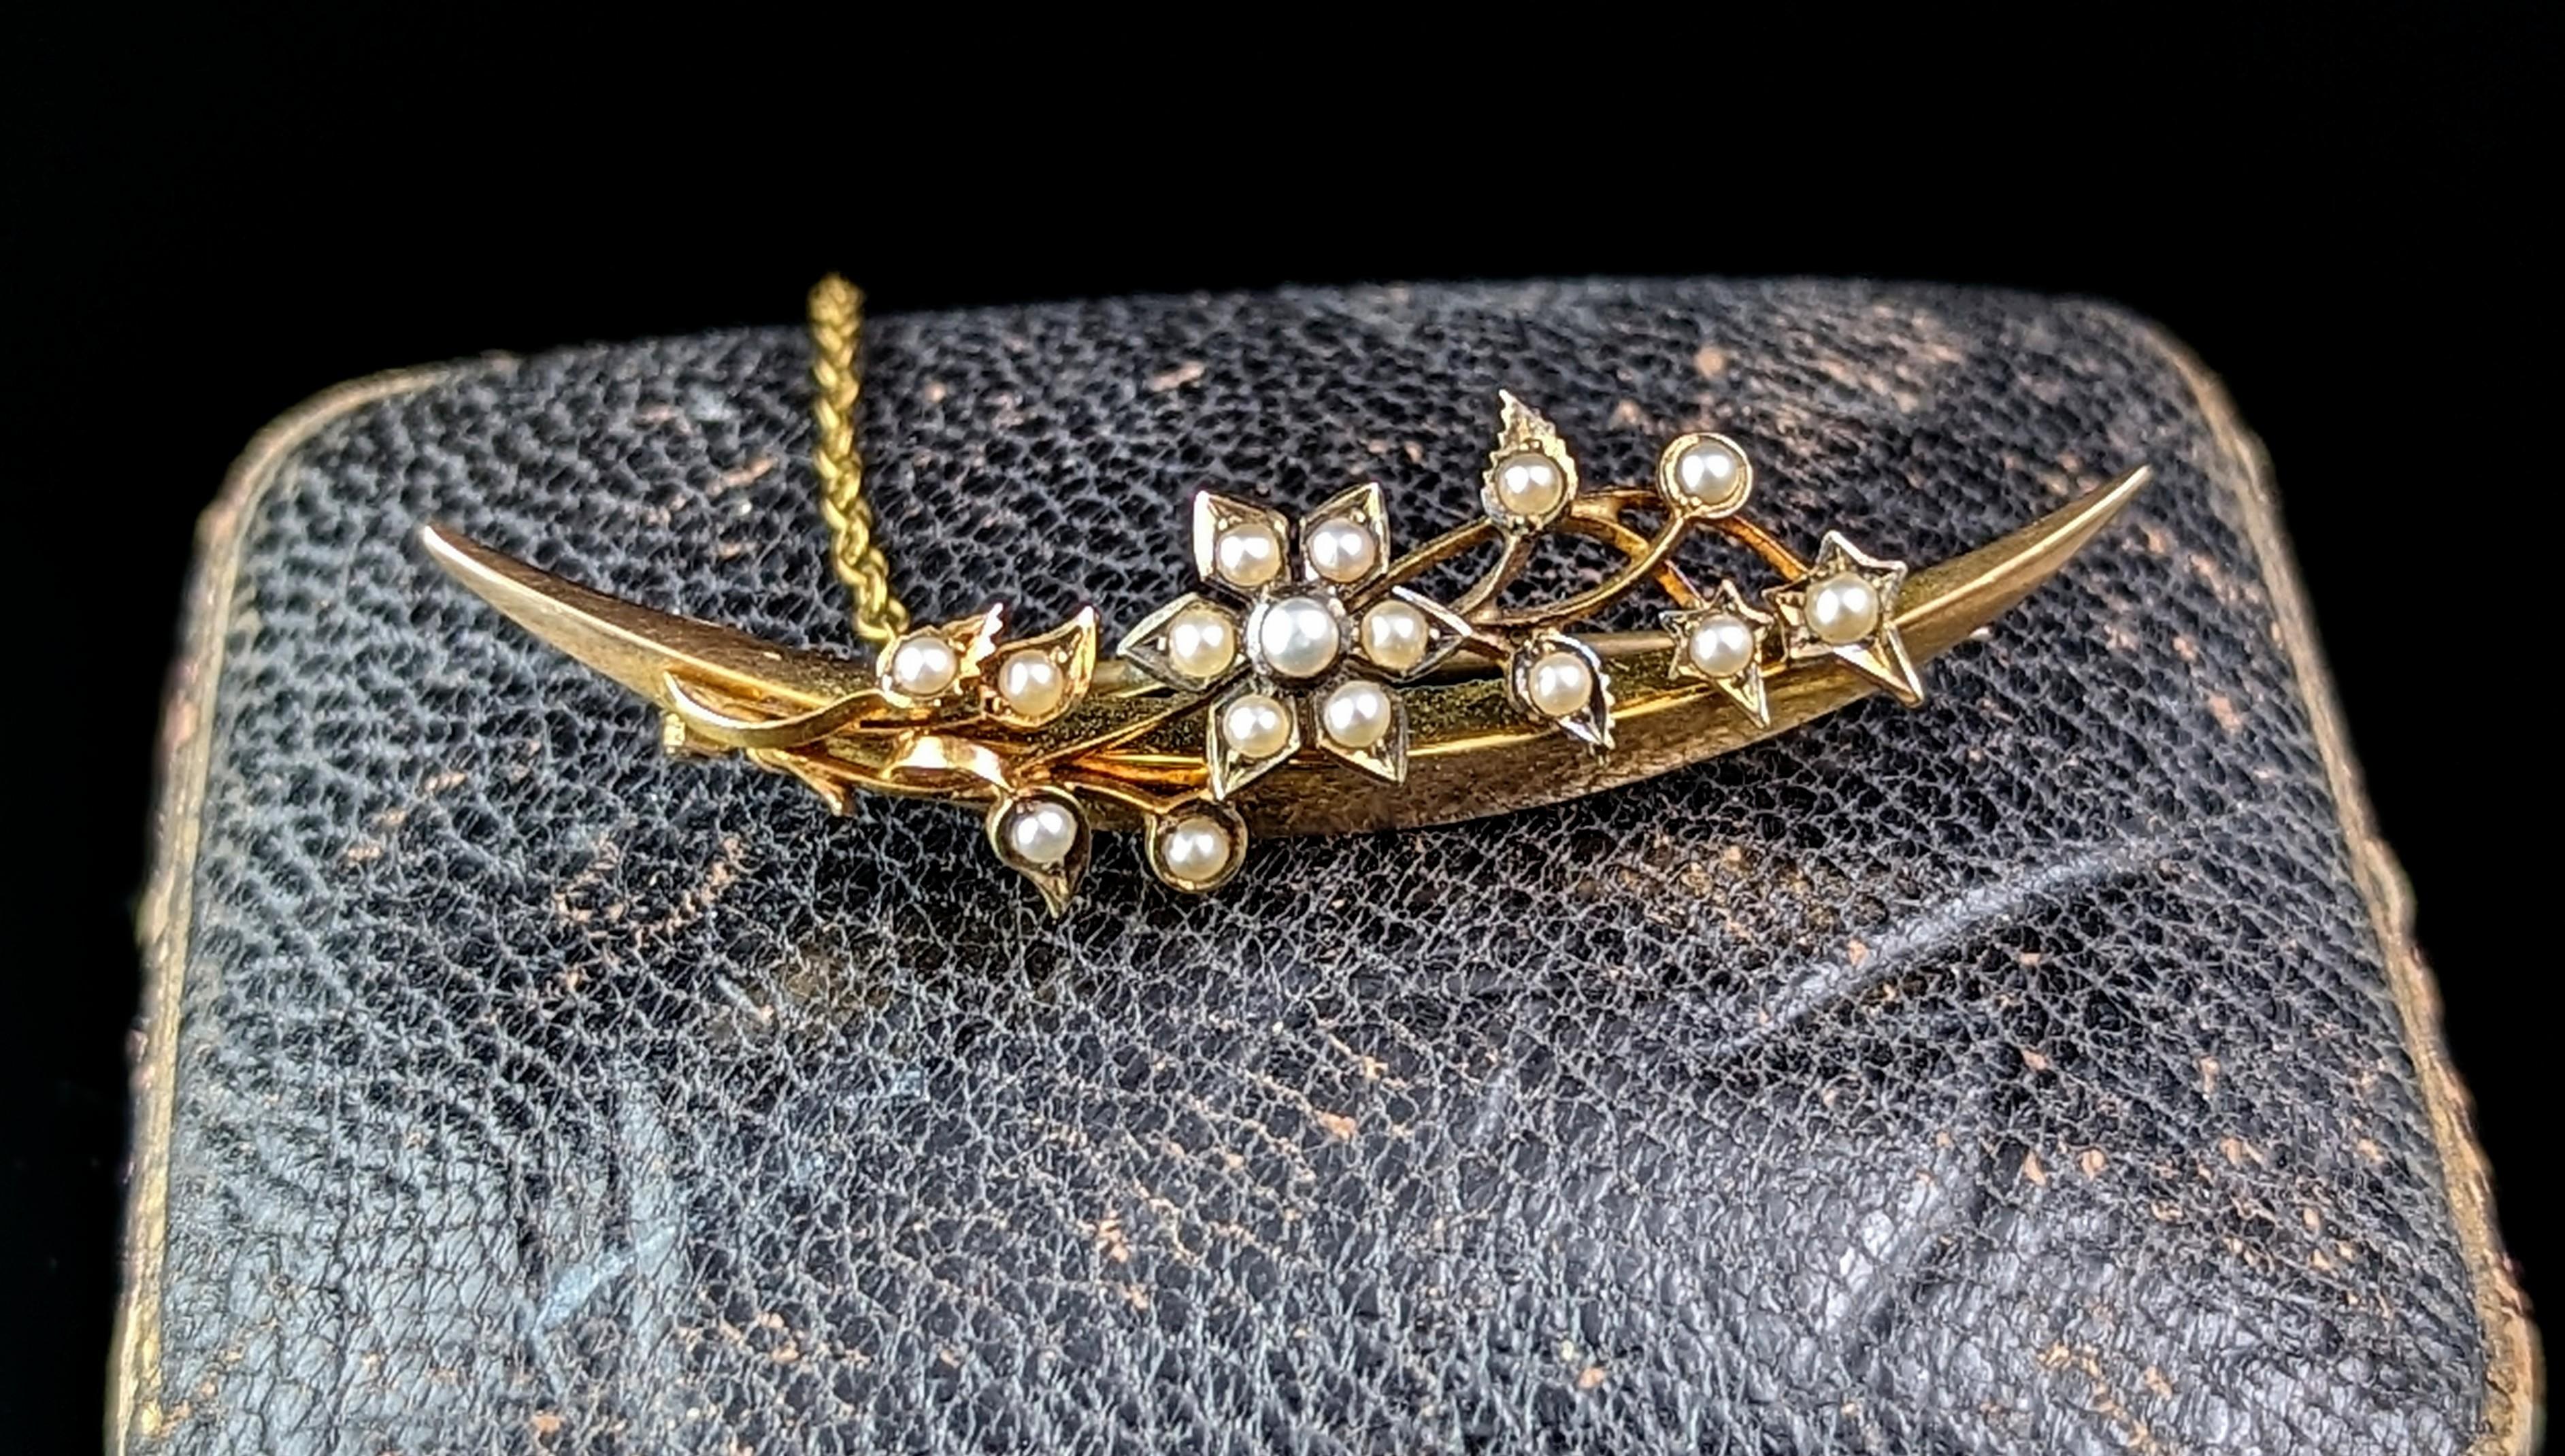 A gorgeous antique, late Victorian Crescent moon and flower brooch.

A beautiful open crescent moon in rich 15ct yellow gold with a pretty spray of flowers over the moon.

The flowers are set with creamy seed pearls.

Crescent moons were a popular